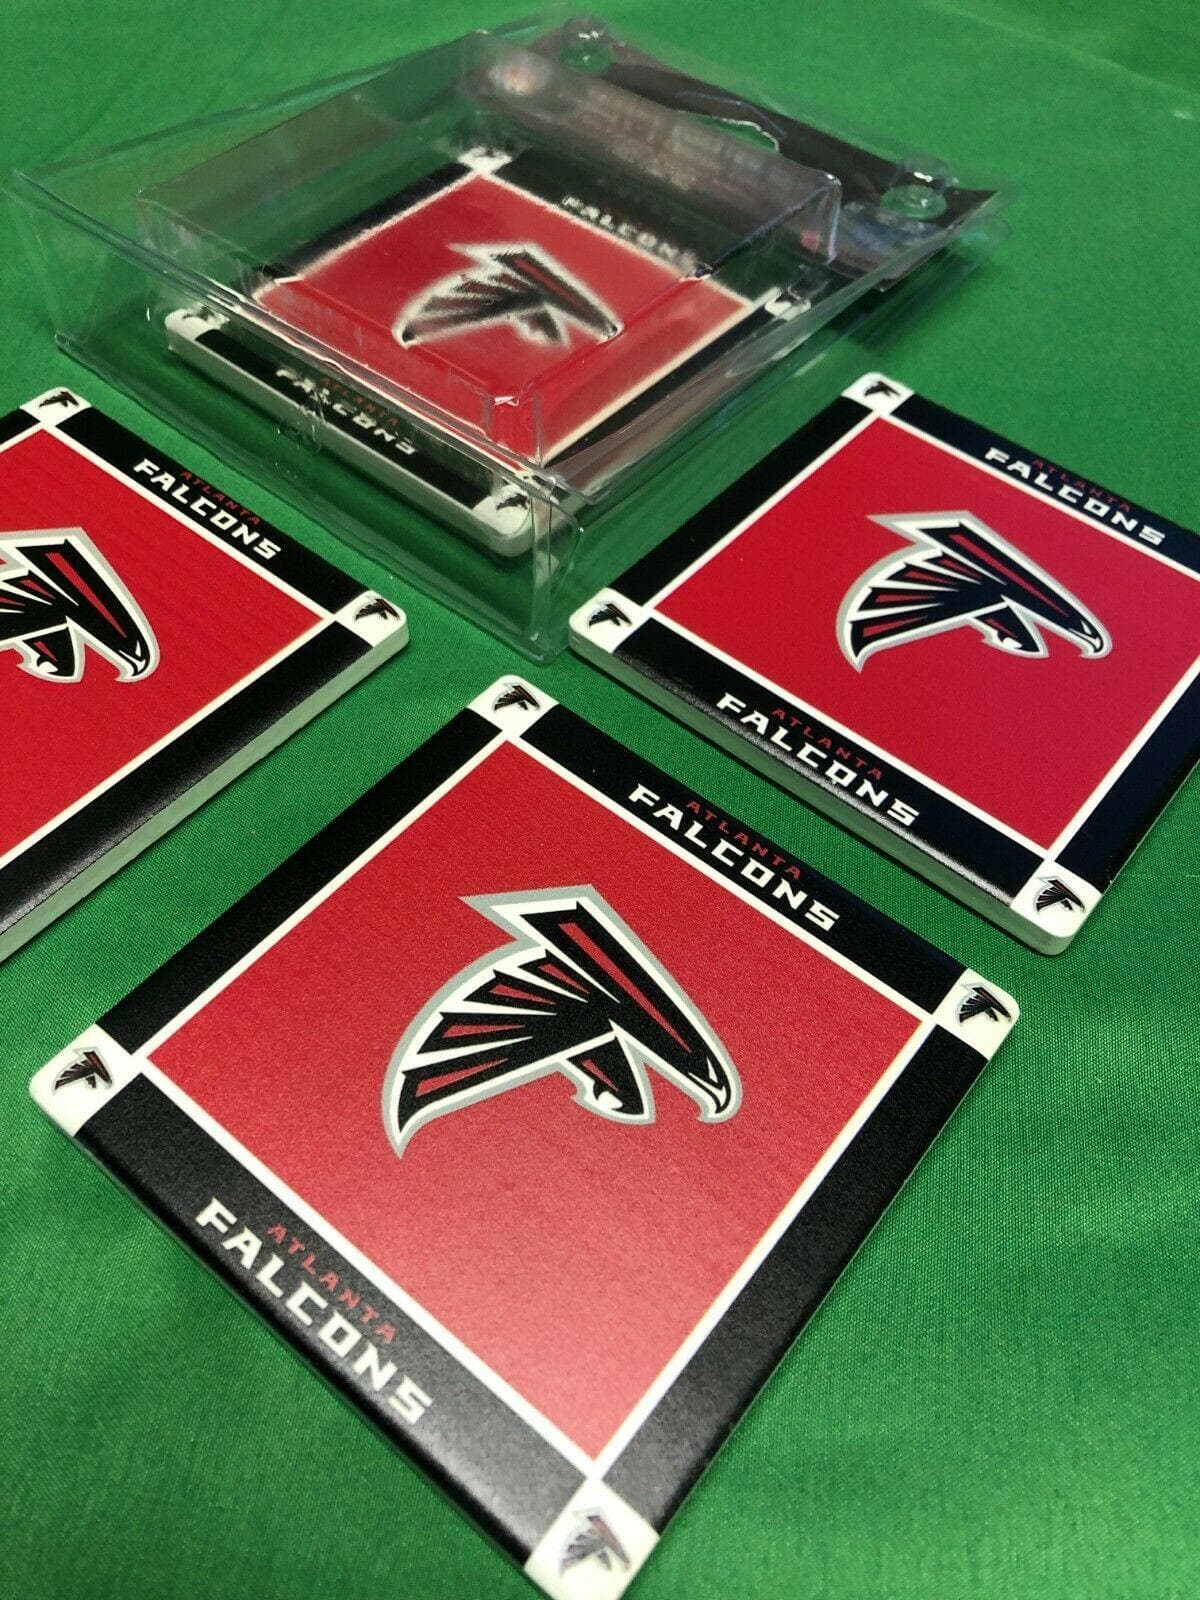 NFL Atlanta Falcons Set of 4 Coasters New in Package Great Gift! NWT